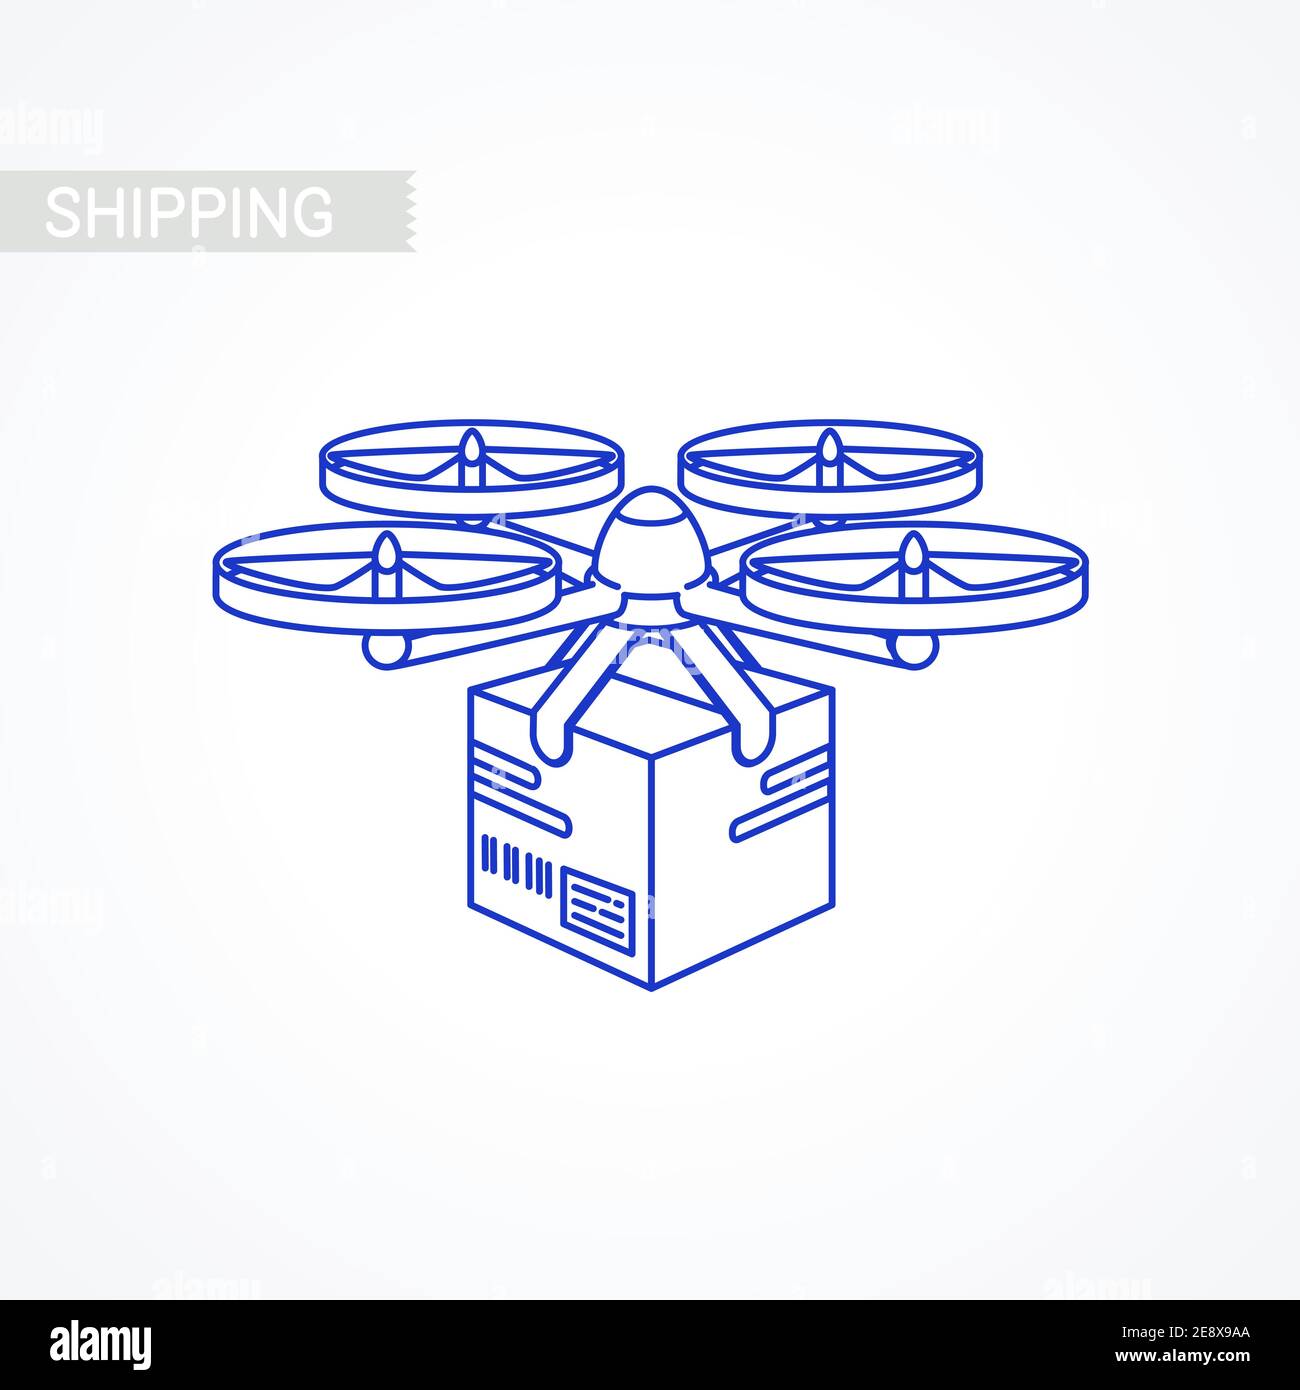 Drone icon. delivery service. Remote air drone with parcel. Modern Shipping package by flying quadcopter. Outline style concept. Quadcopter with box. Stock Vector